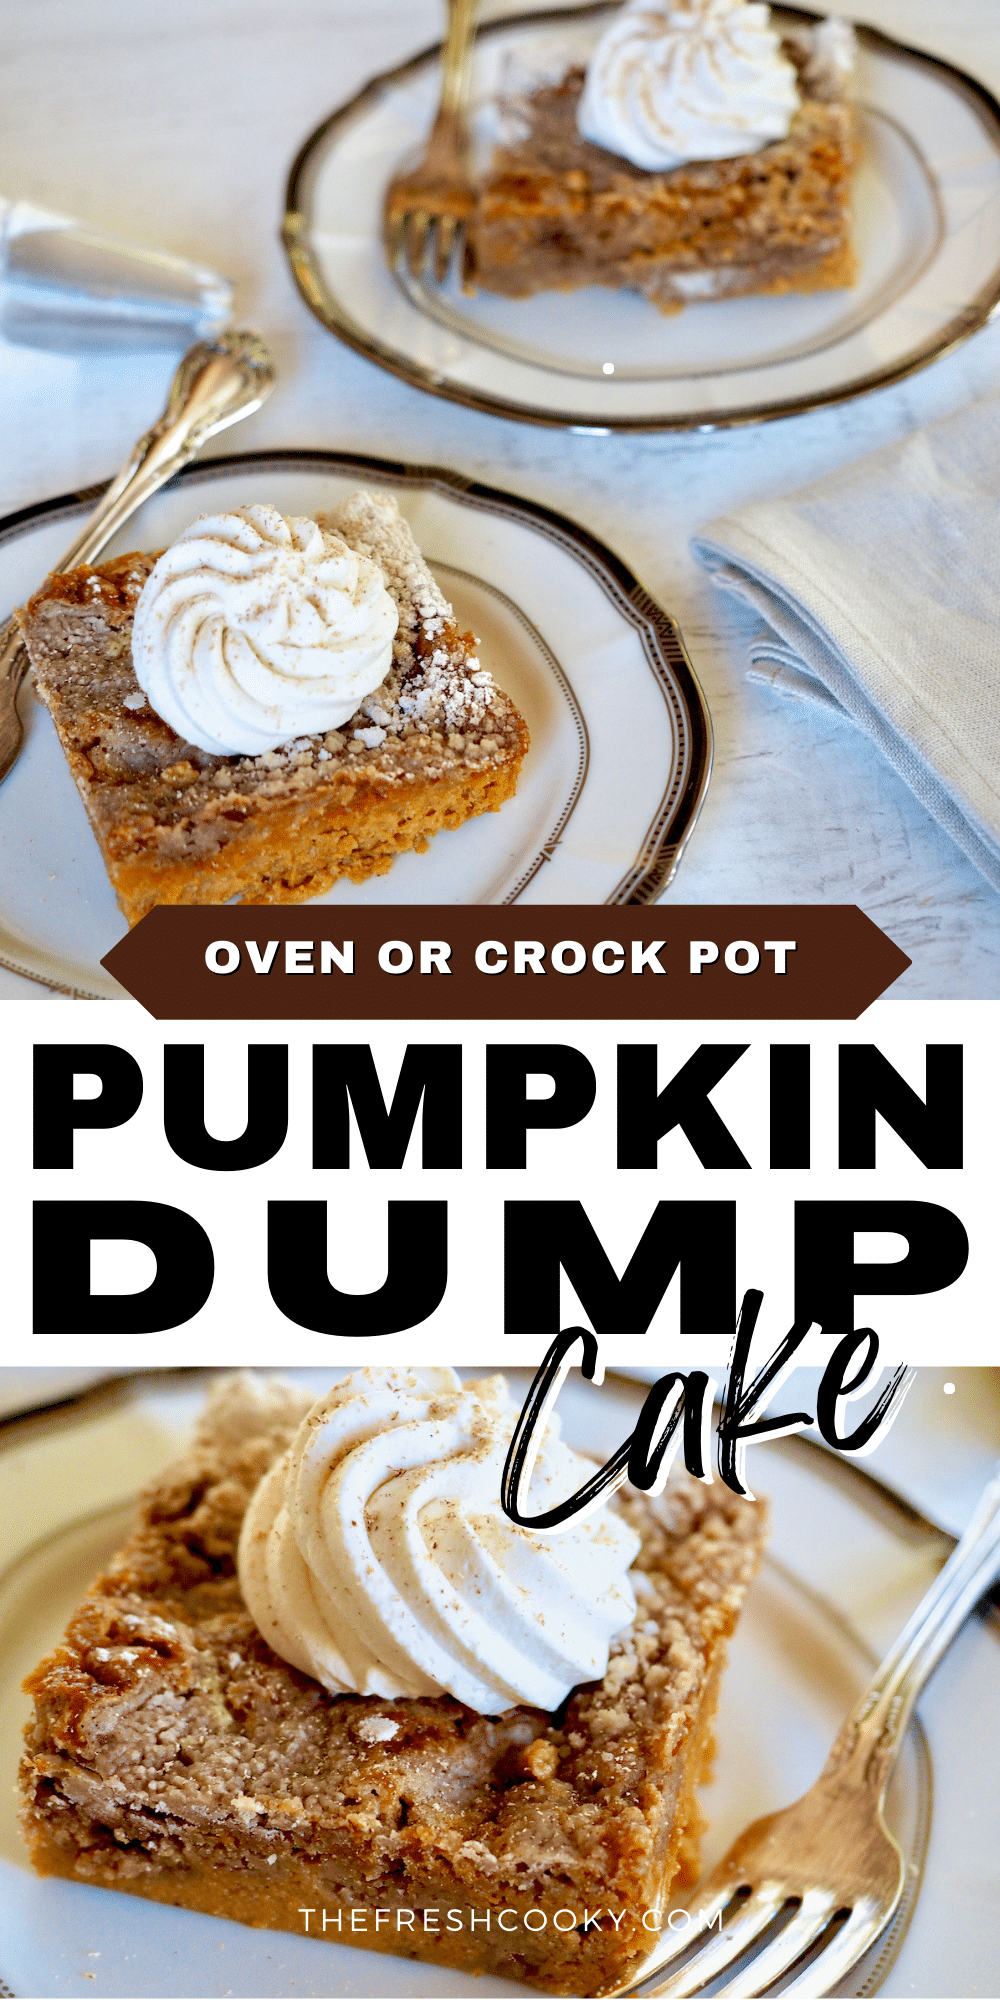 Pin for easy pumpkin dump cake with top image of two slices of pumpkin dump cake topped with whipped cream, bottom image of single slice close up of dump cake.